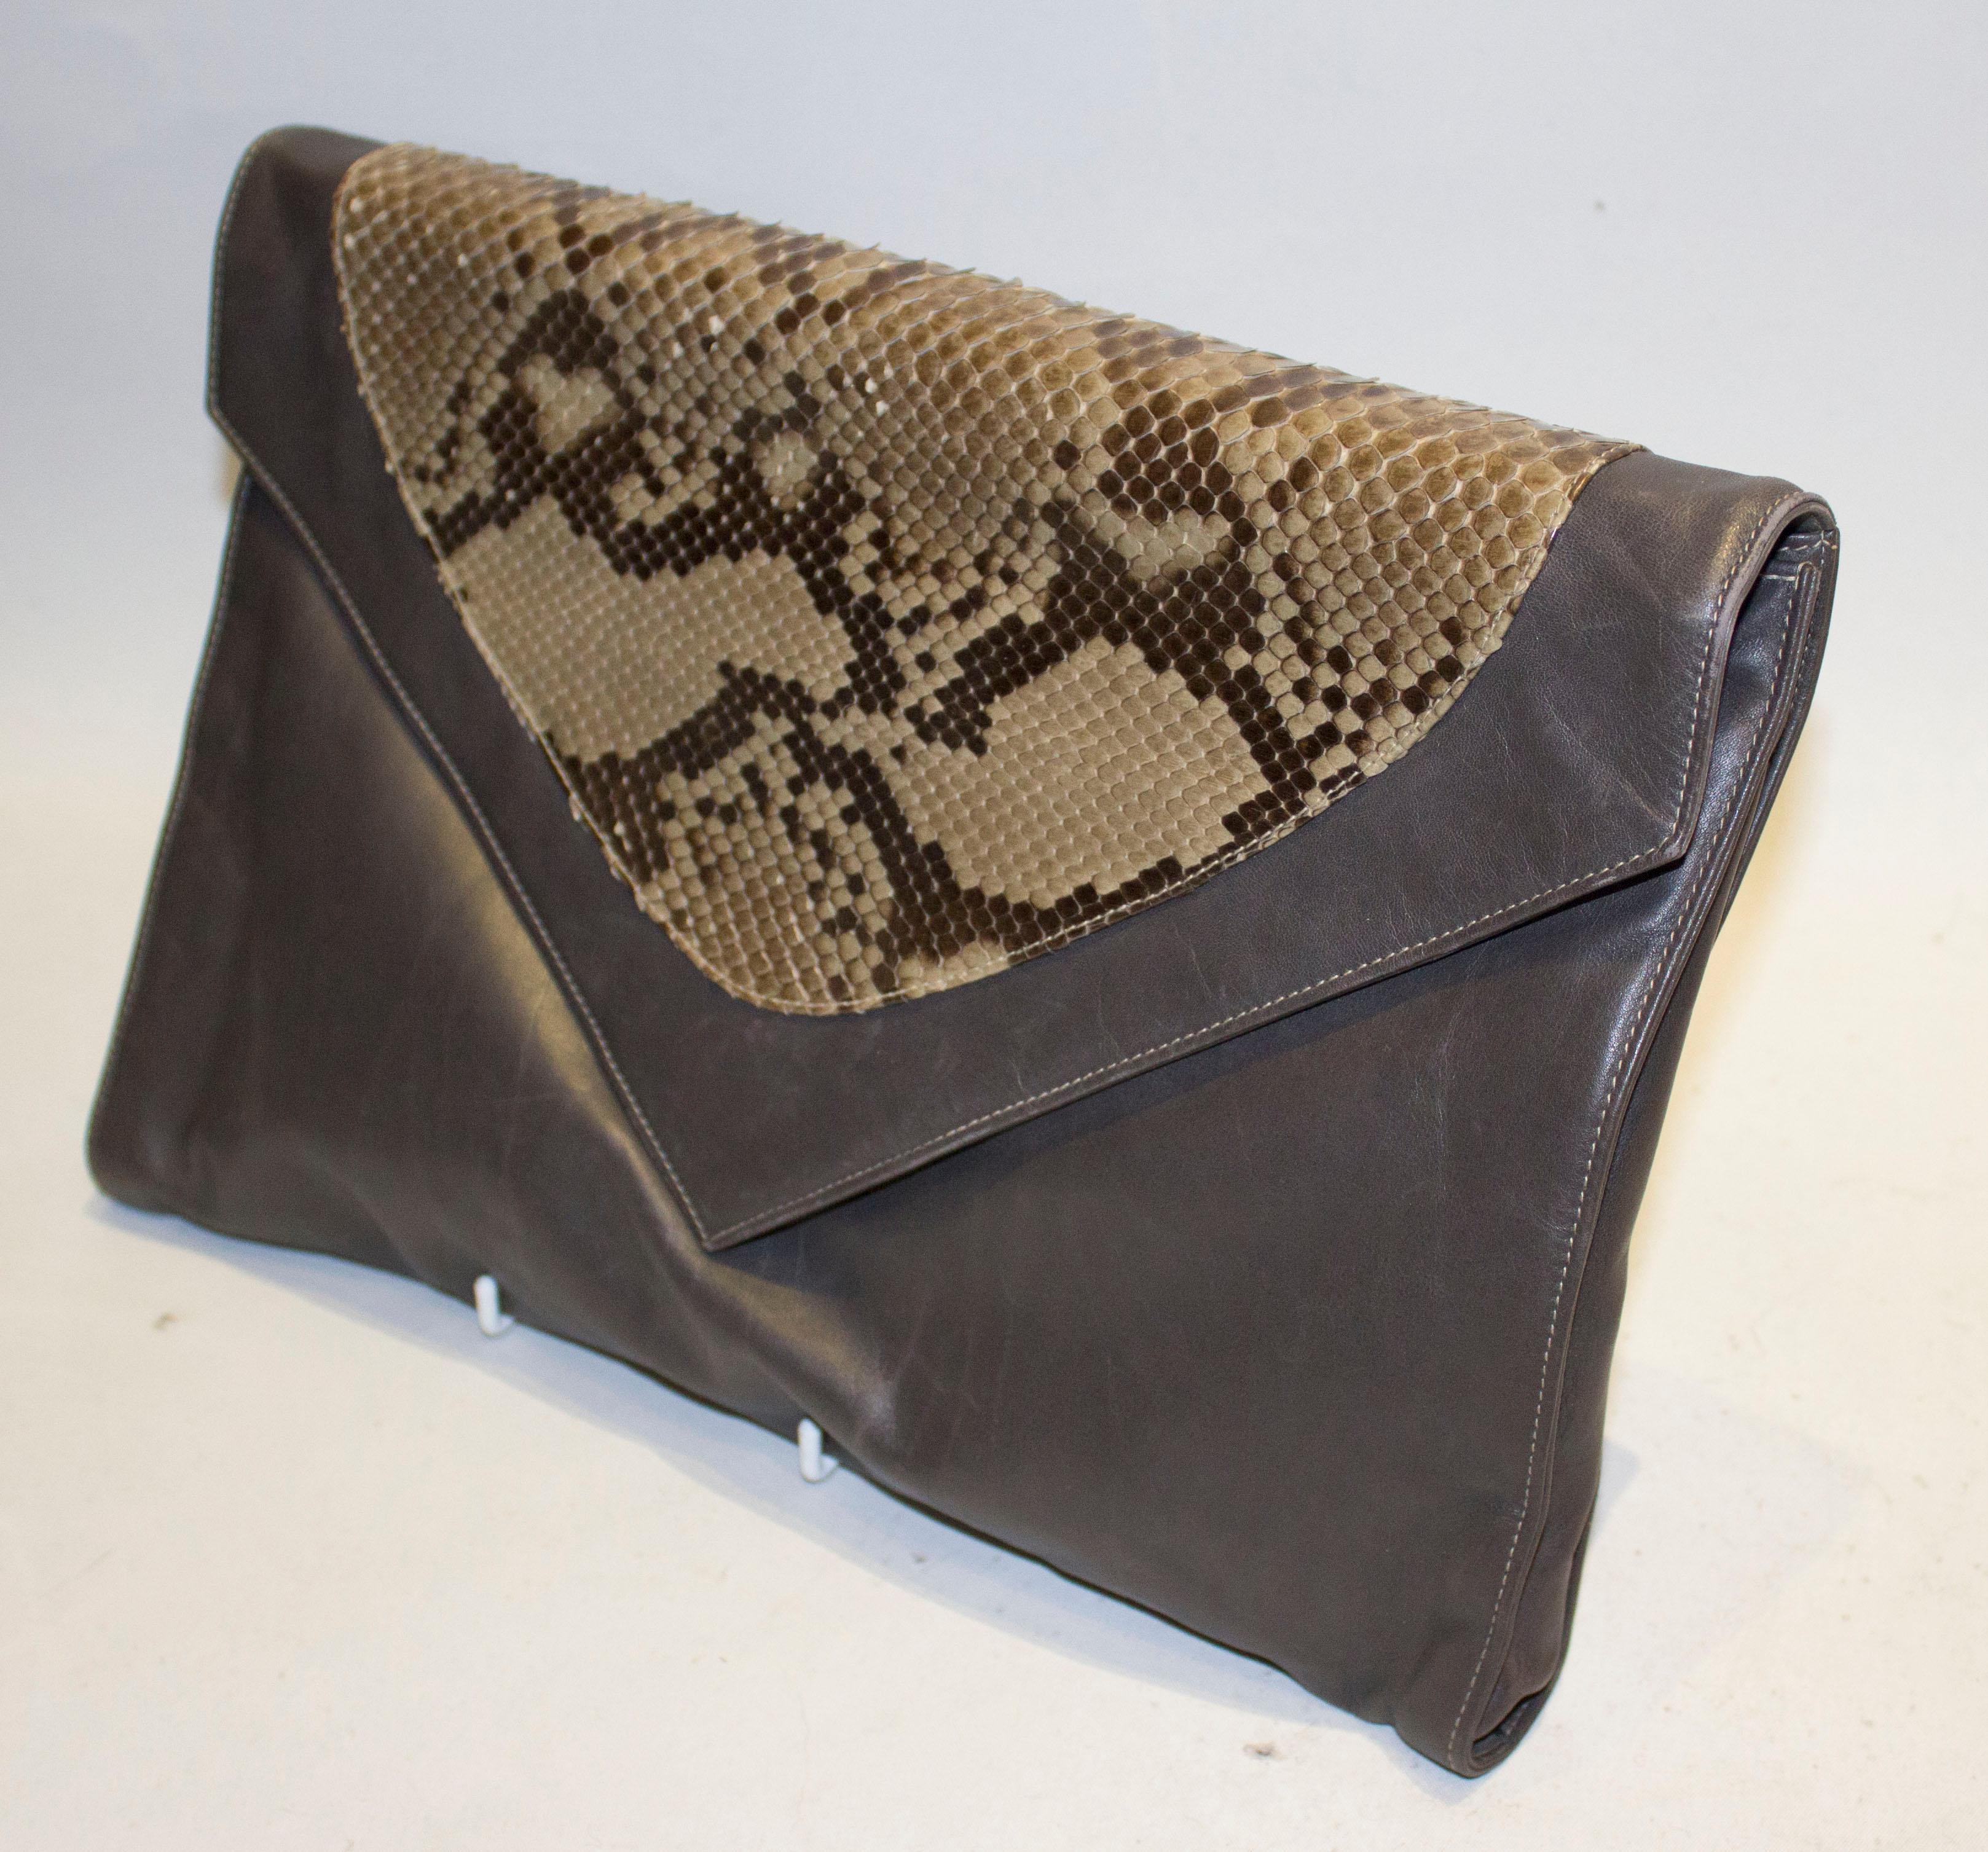 A large vintage super soft leather clutch bag by Aldorvandi. The bag has a flap over front with popper fastening and snakeskin patch. There is an internal zip pocket and strap, so the bag can be used a clutch bag or shoulder bag.
Measurements; Width